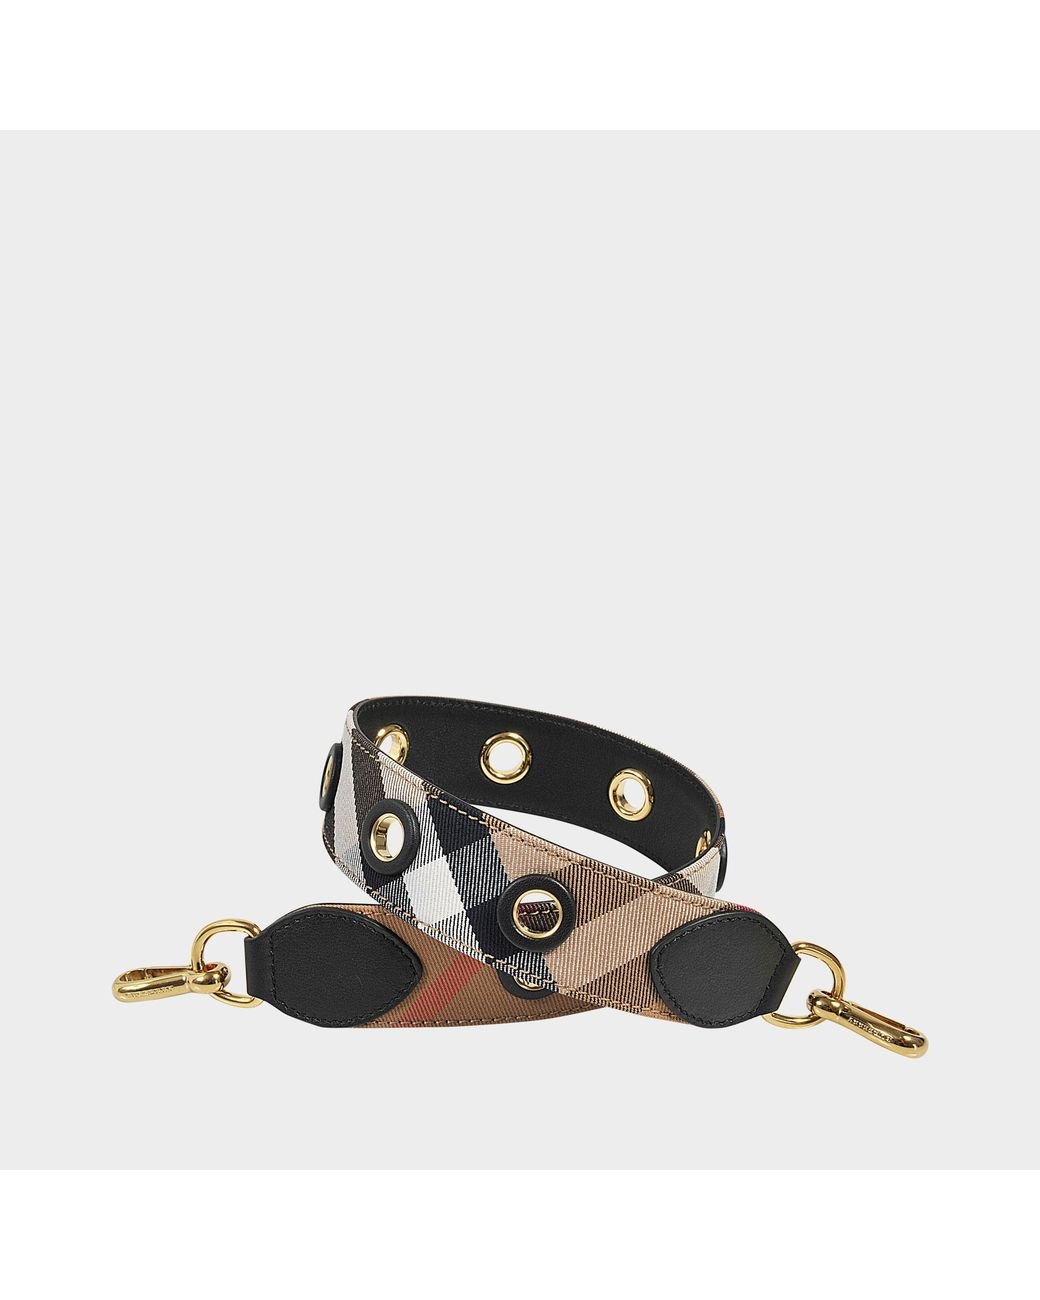 Burberry Buckle Bag Strap in Black | Lyst